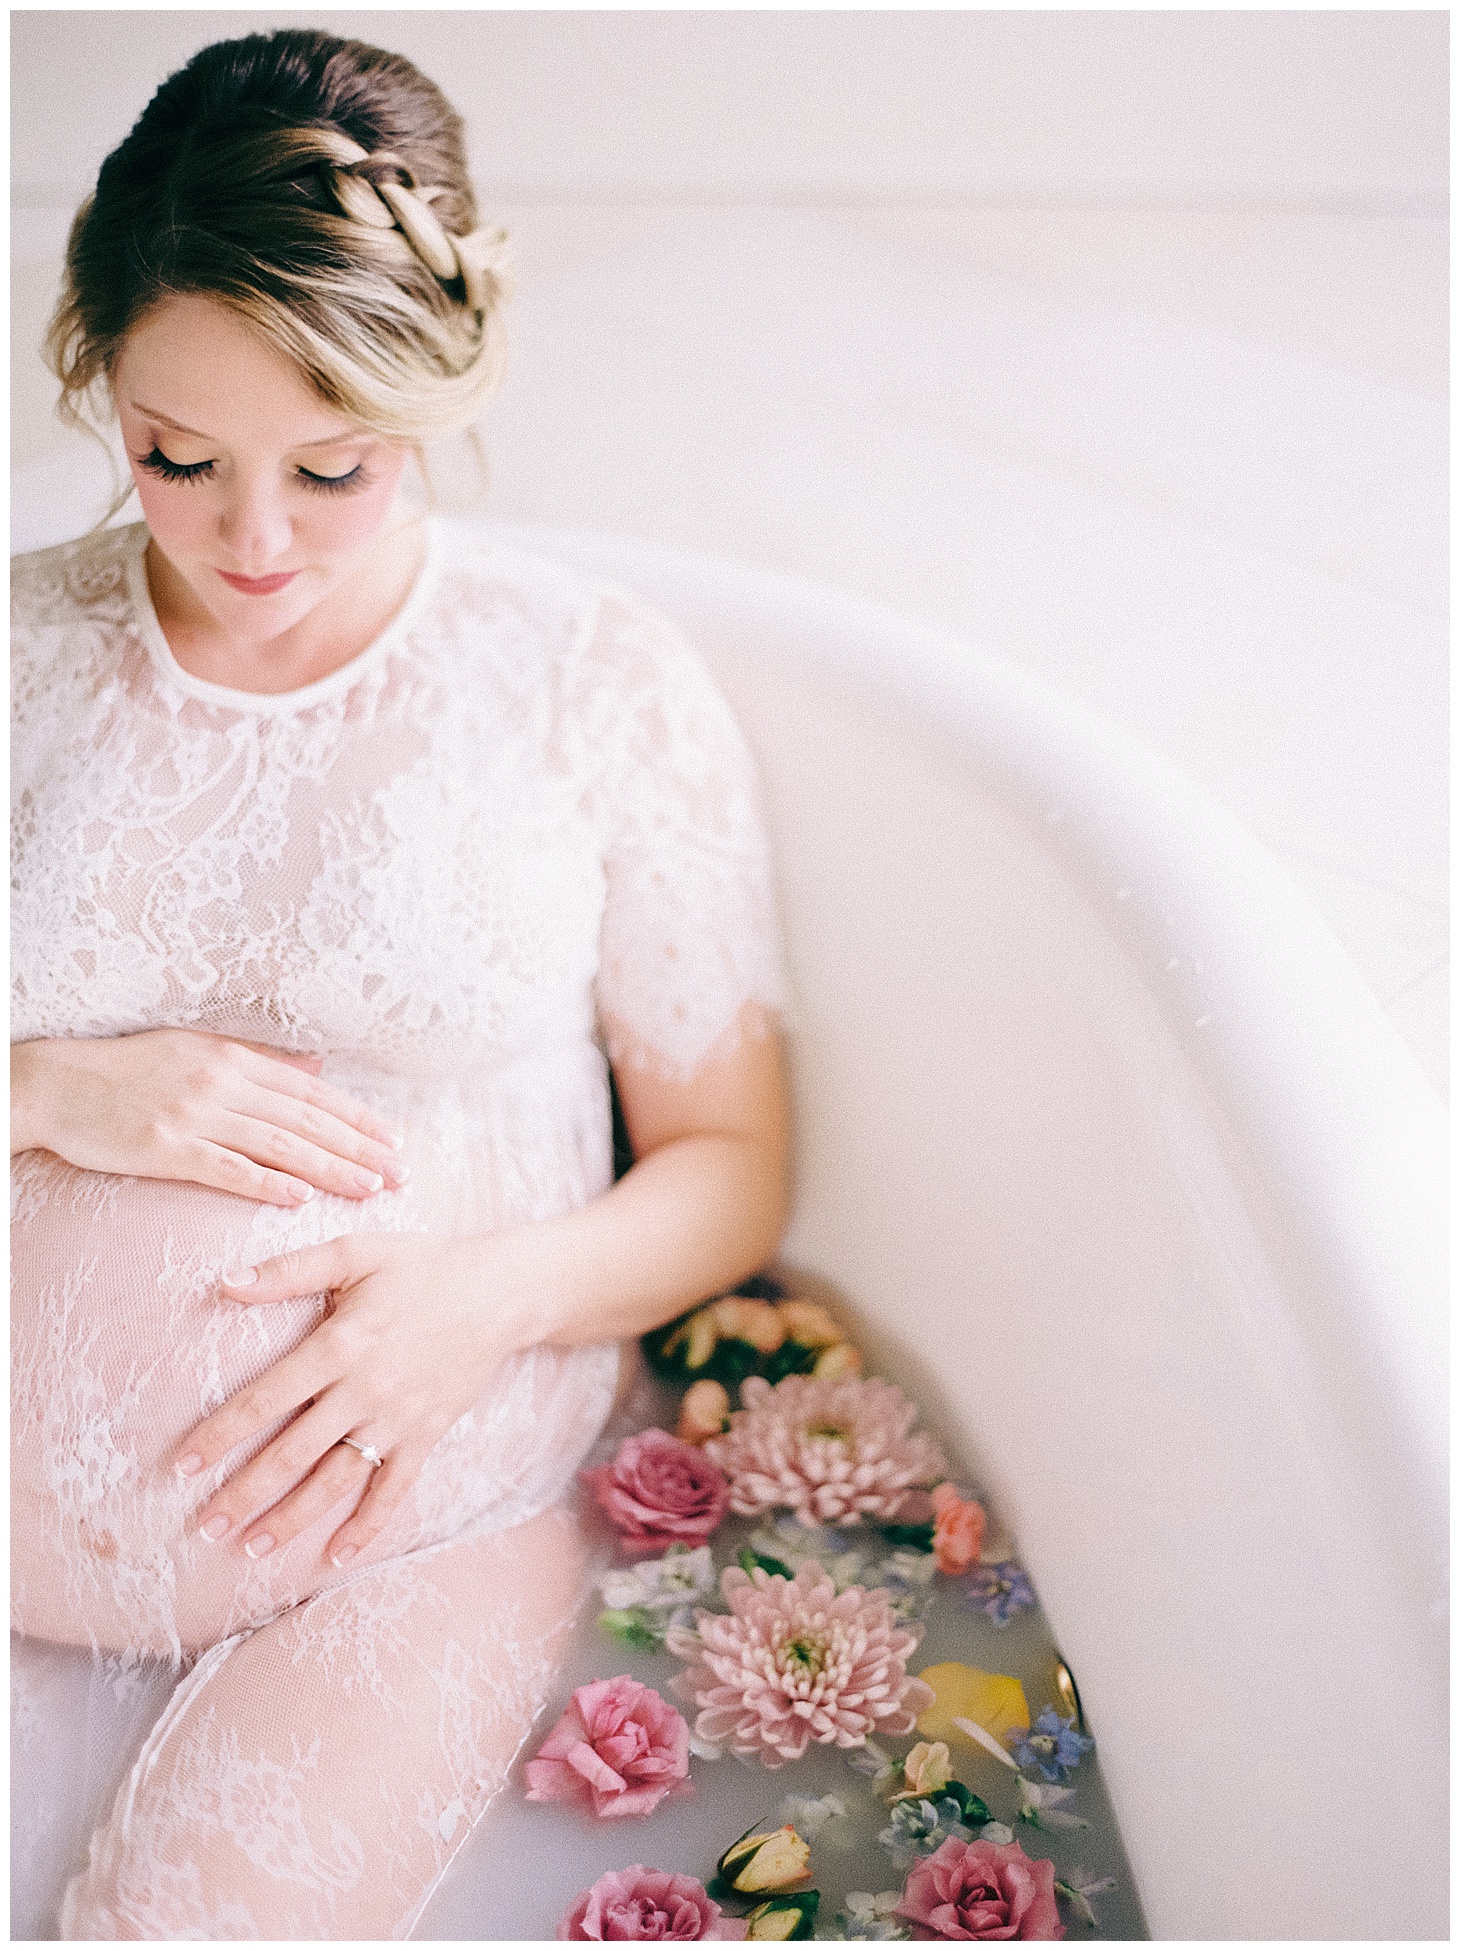 Ethereal Maternity Session, Floral Bath Maternity Session, Fine Art Maternity, Film Photography, Fine Art Film Photography, Nikki Santerre 